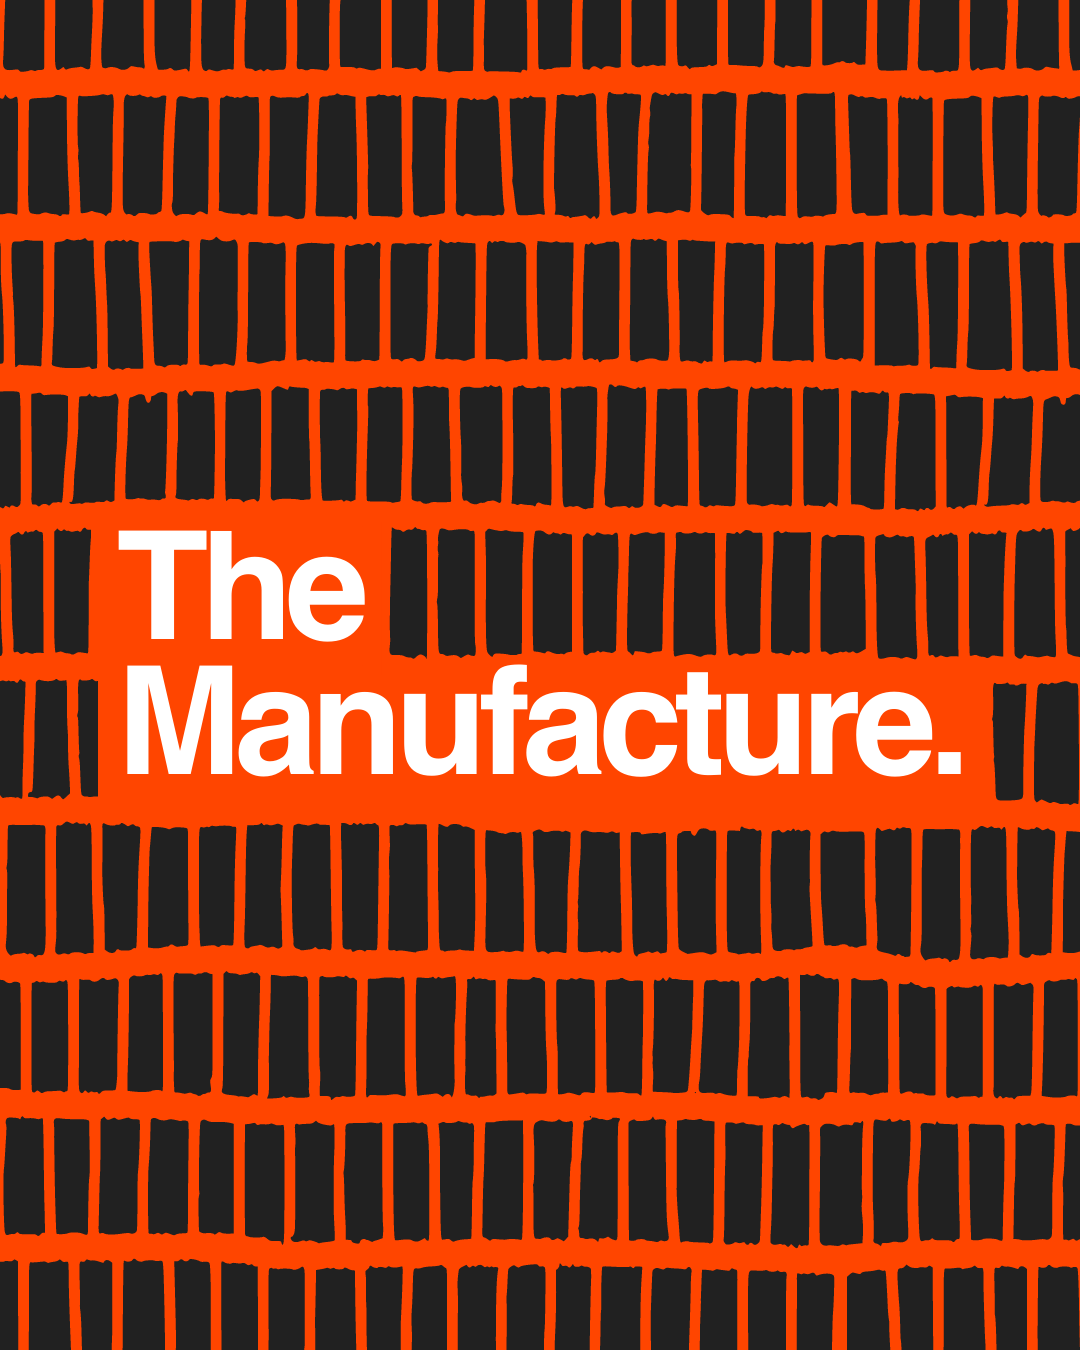 The Manufacture poster inspired by international Swiss style.